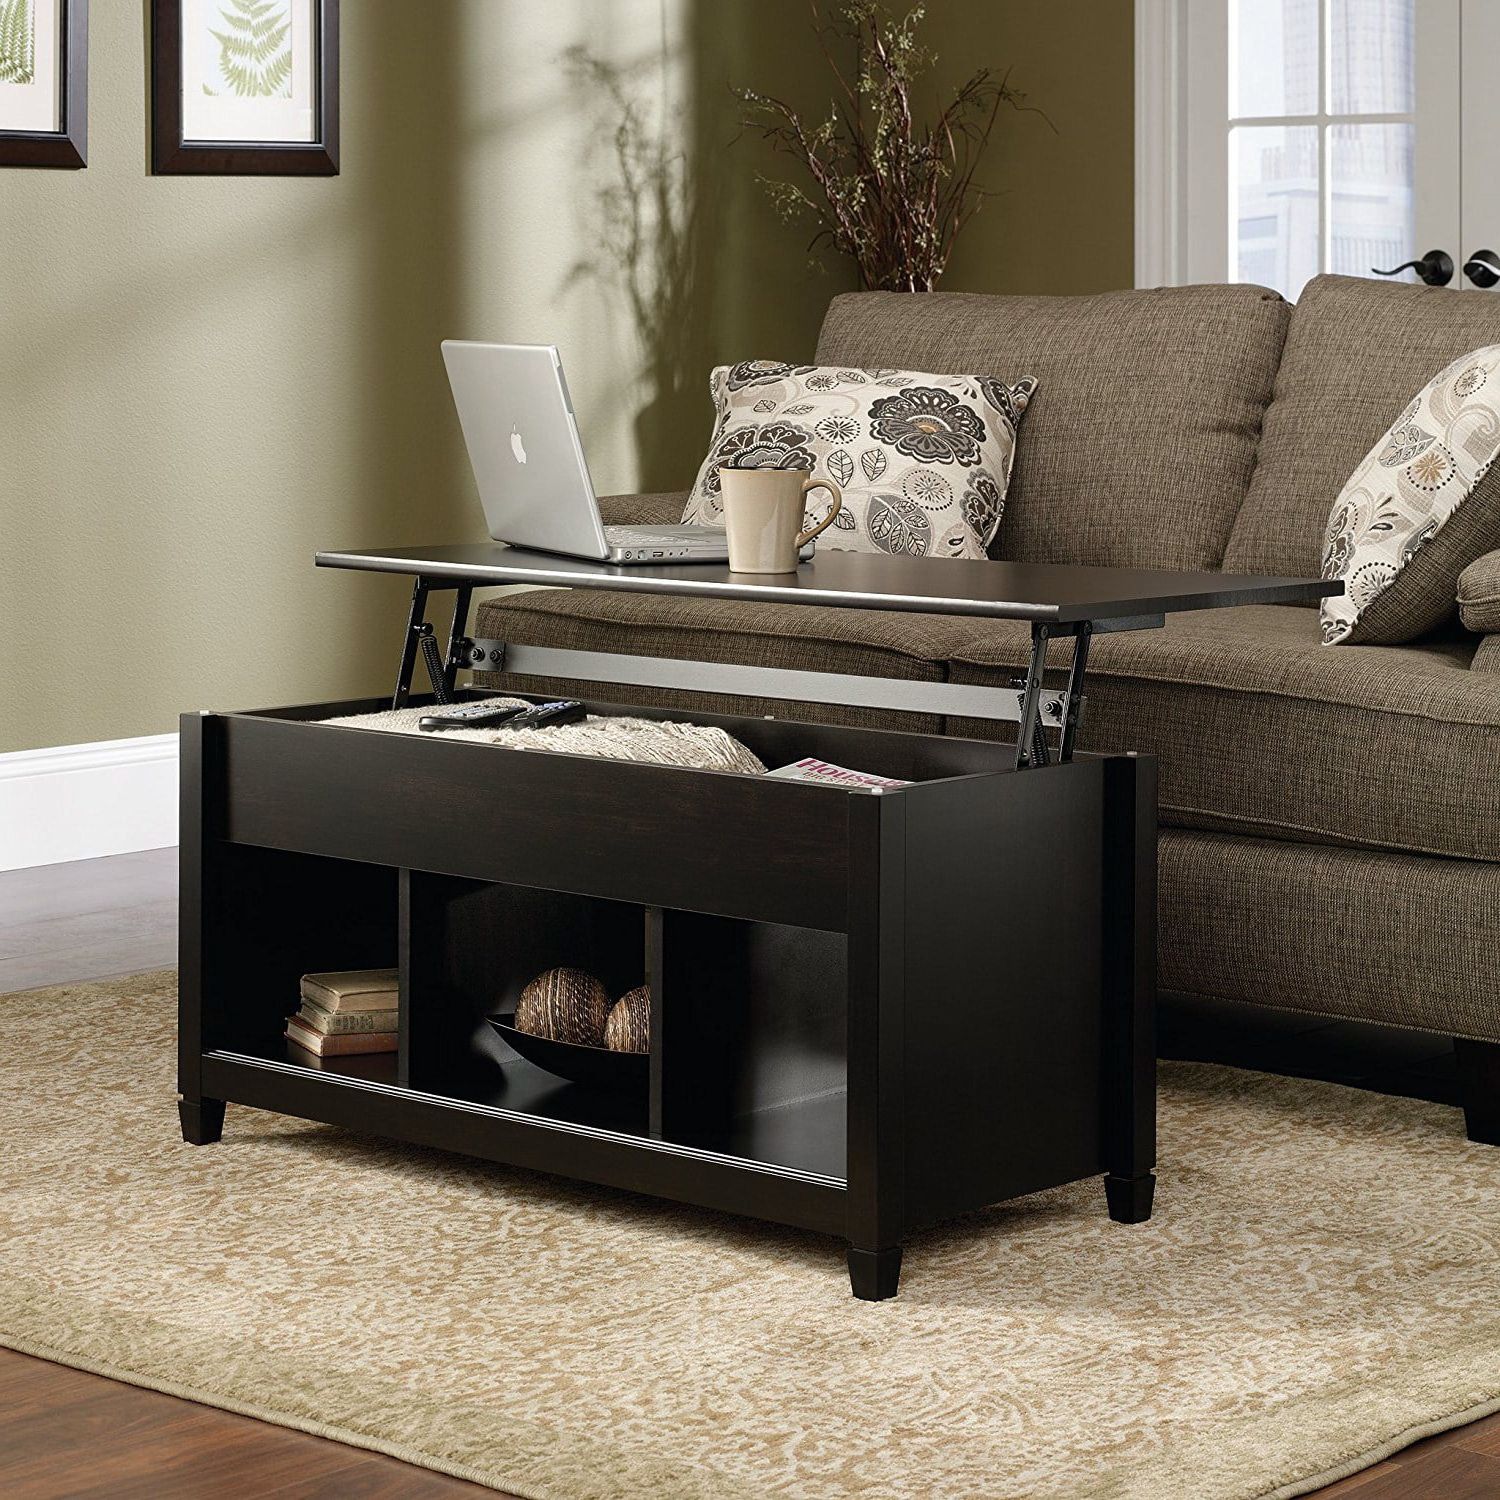 Widely Used Coffee Tables With Storage With Zimtown Lift Up Top Coffee Table With Hidden Compartment End Rectangle (View 10 of 15)